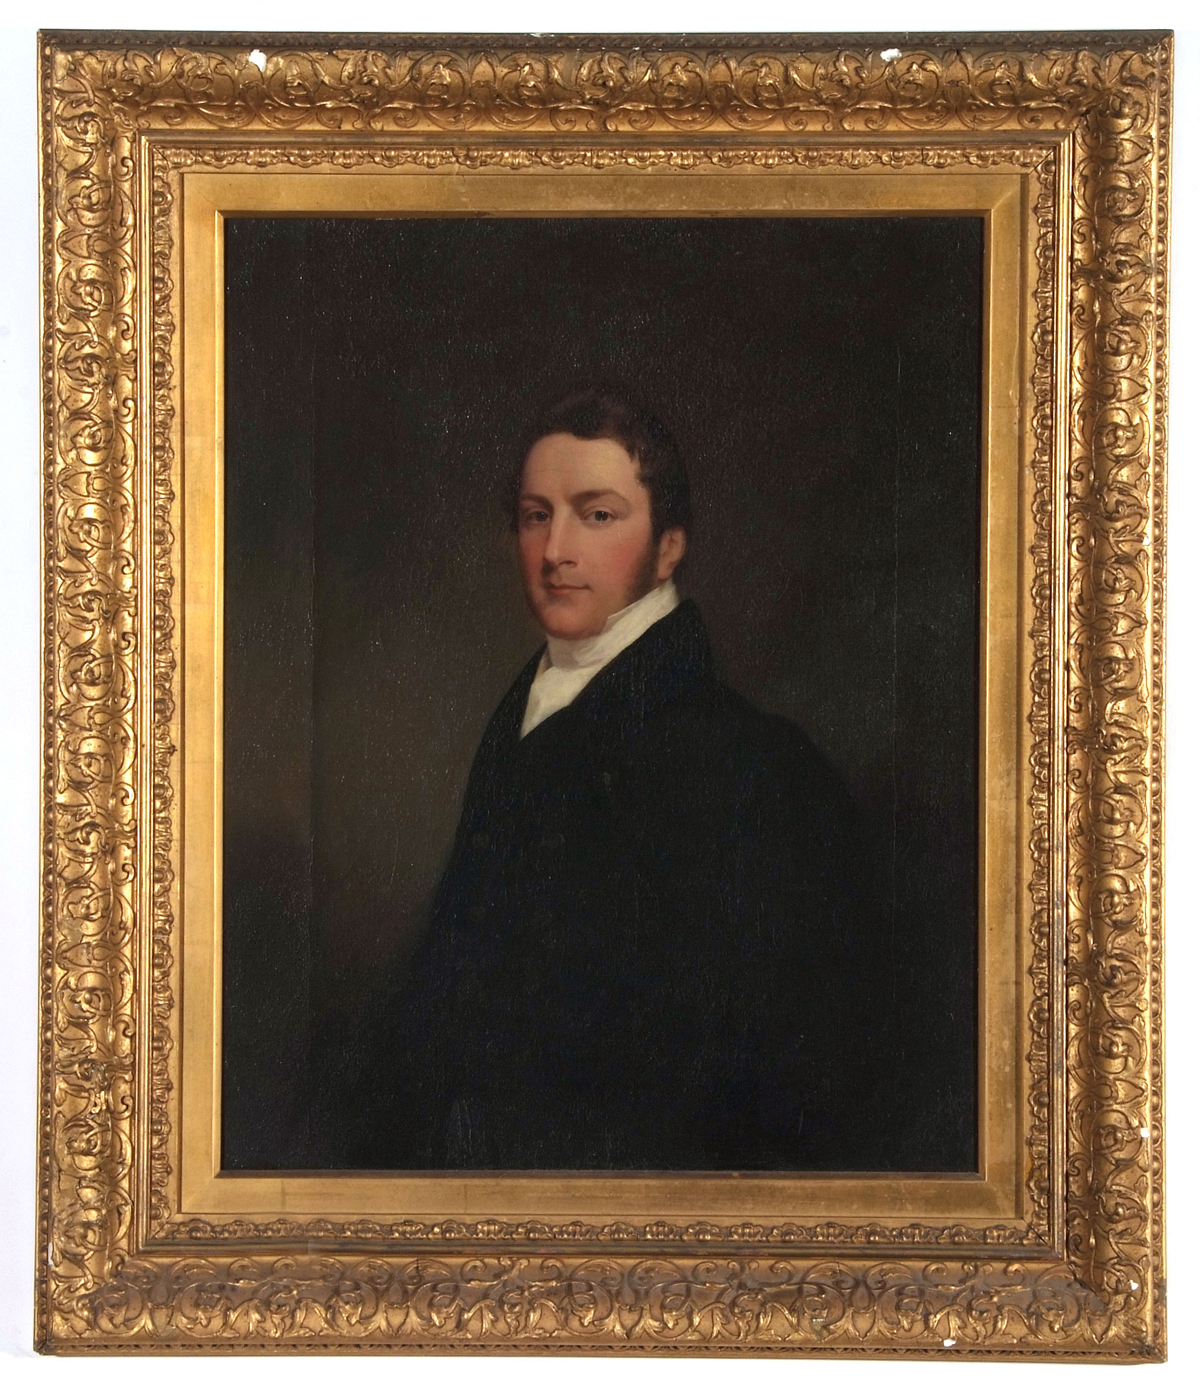 ENGLISH SCHOOL, (19TH CENTURY) Portrait of a Gent in Black Morning Coat and White Cravat oil on